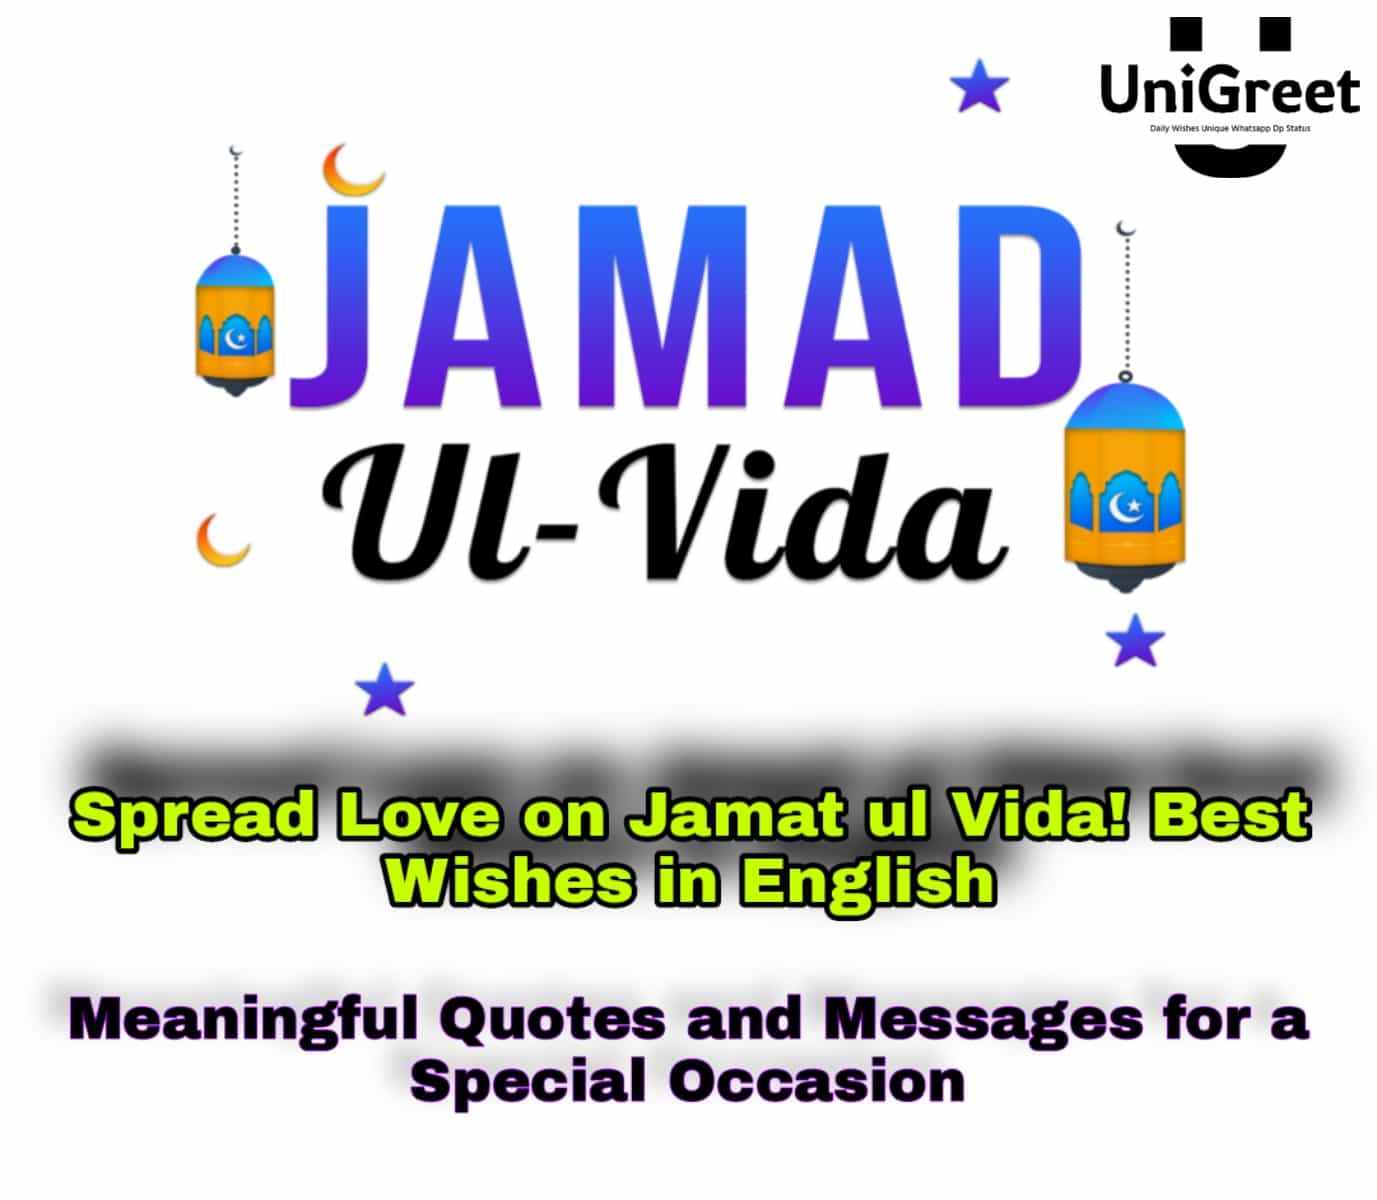 tJamat ul Vida Wishes in English: - Meaningful Quotes and Messages for a Special Occasion Image